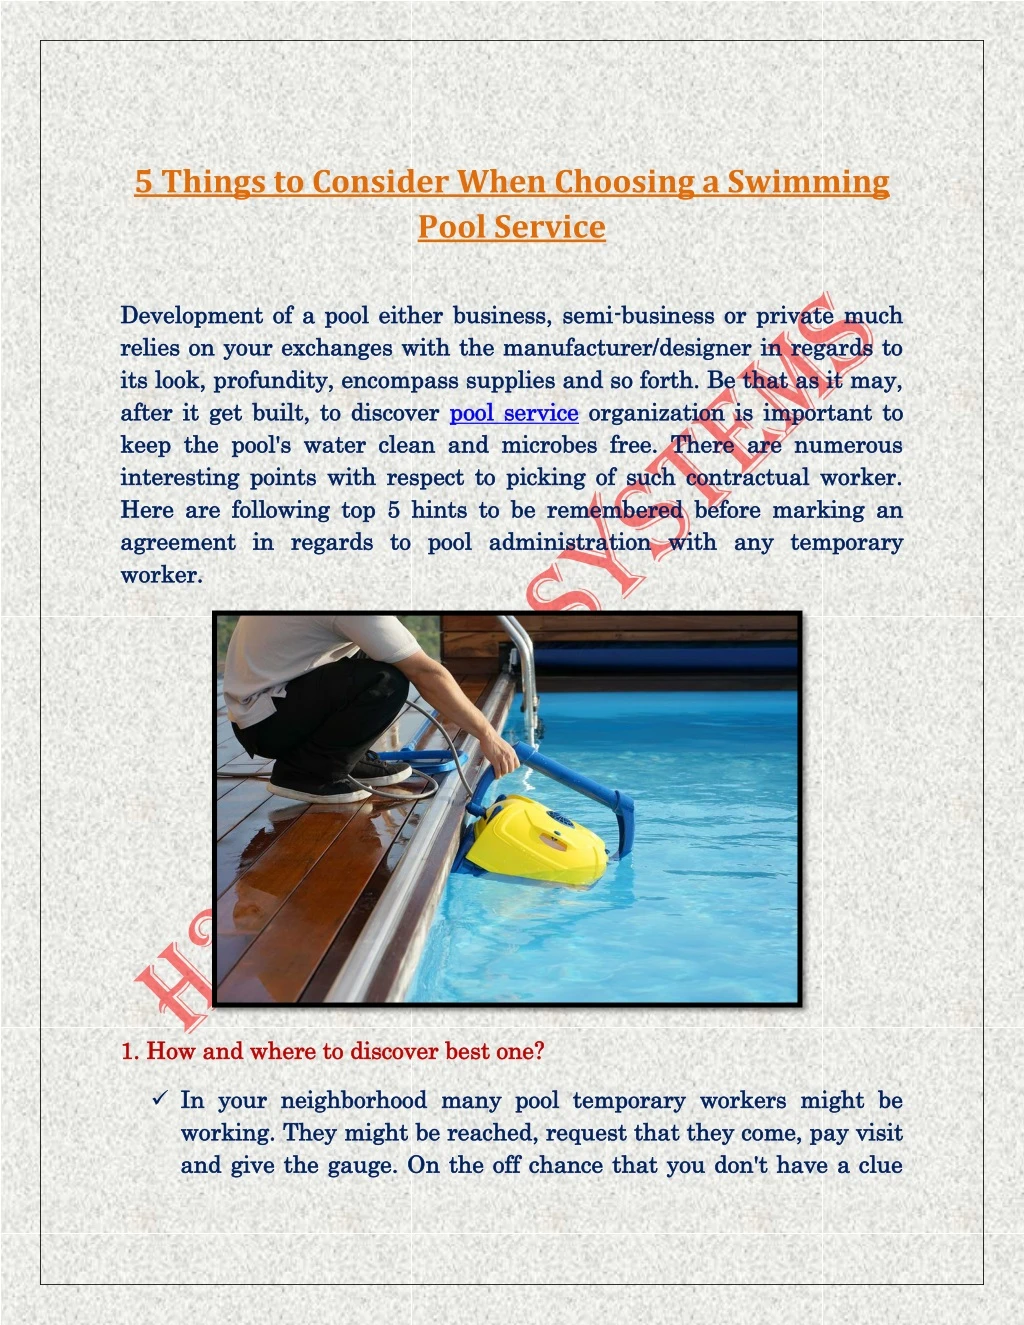 5 things to consider when choosing a swimming